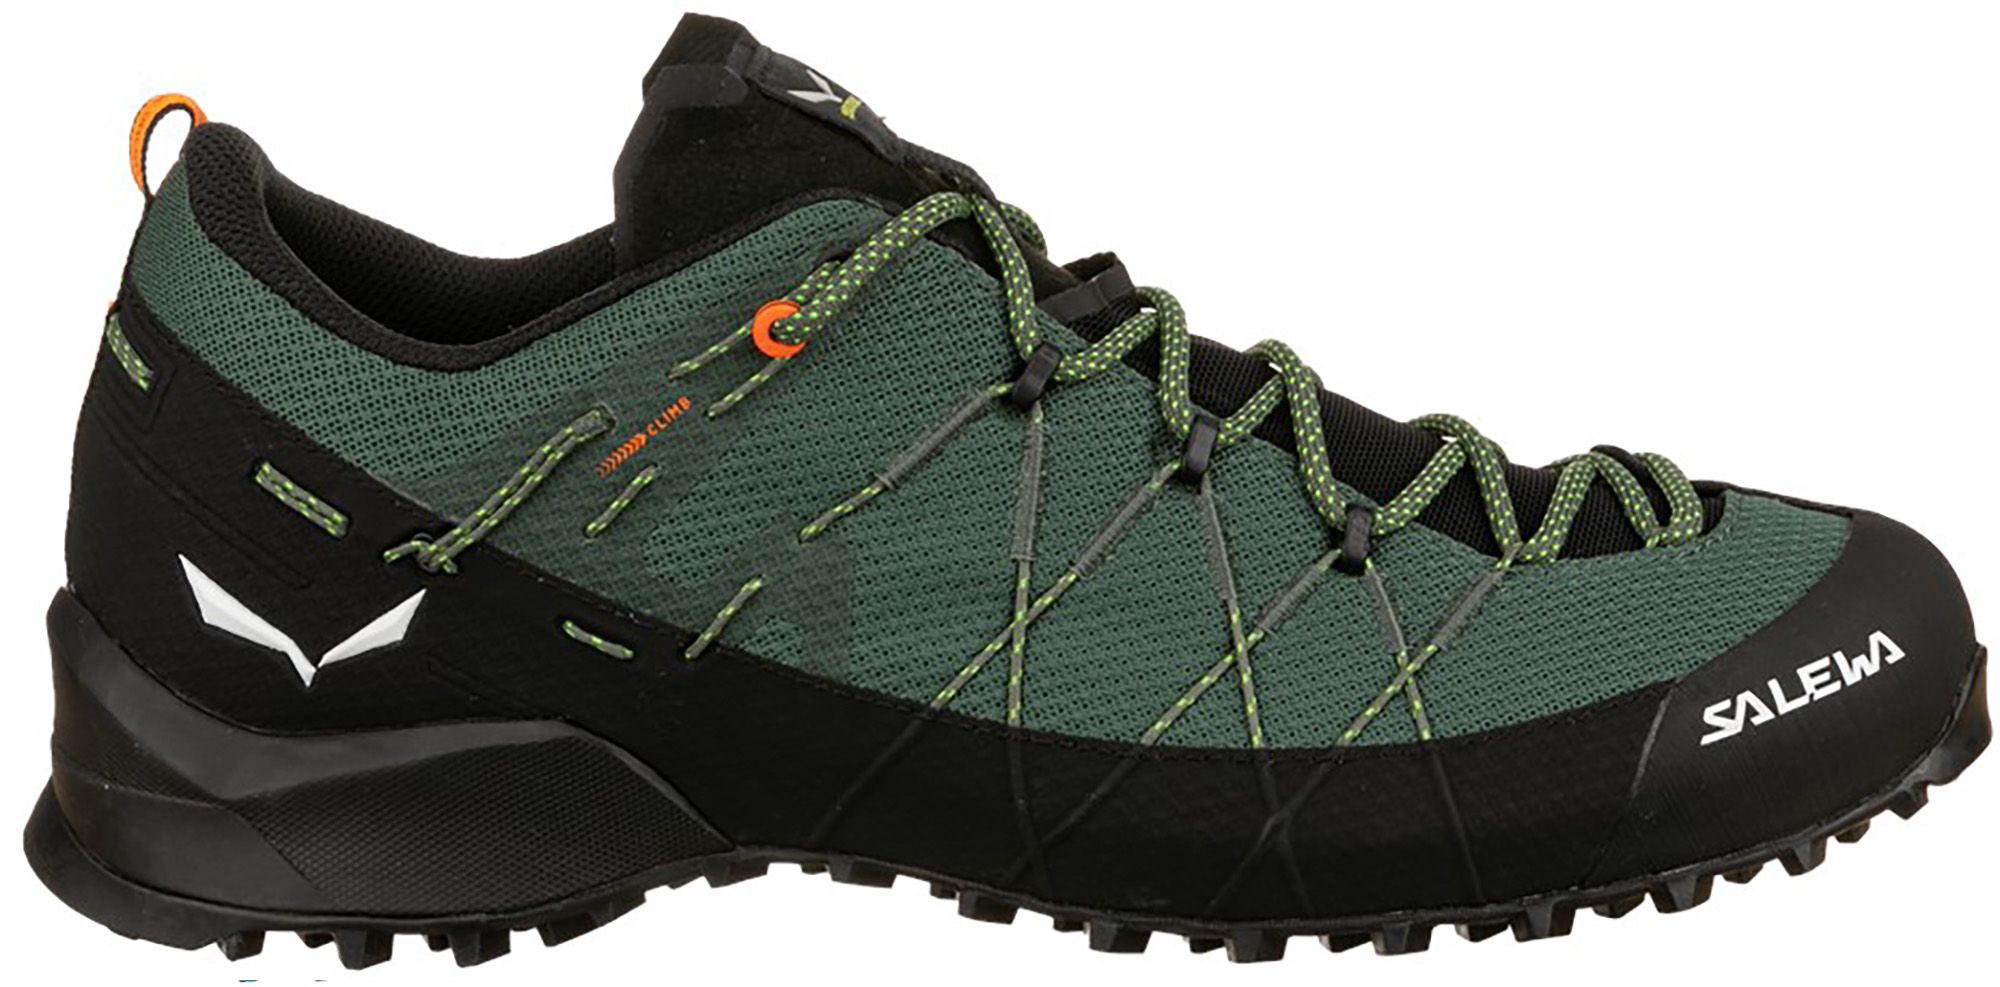 Photos - Trekking Shoes Salewa Men's Wildfire 2 Approach Shoes, Size 10, Black/Green 22IYPMMWLDFR2 